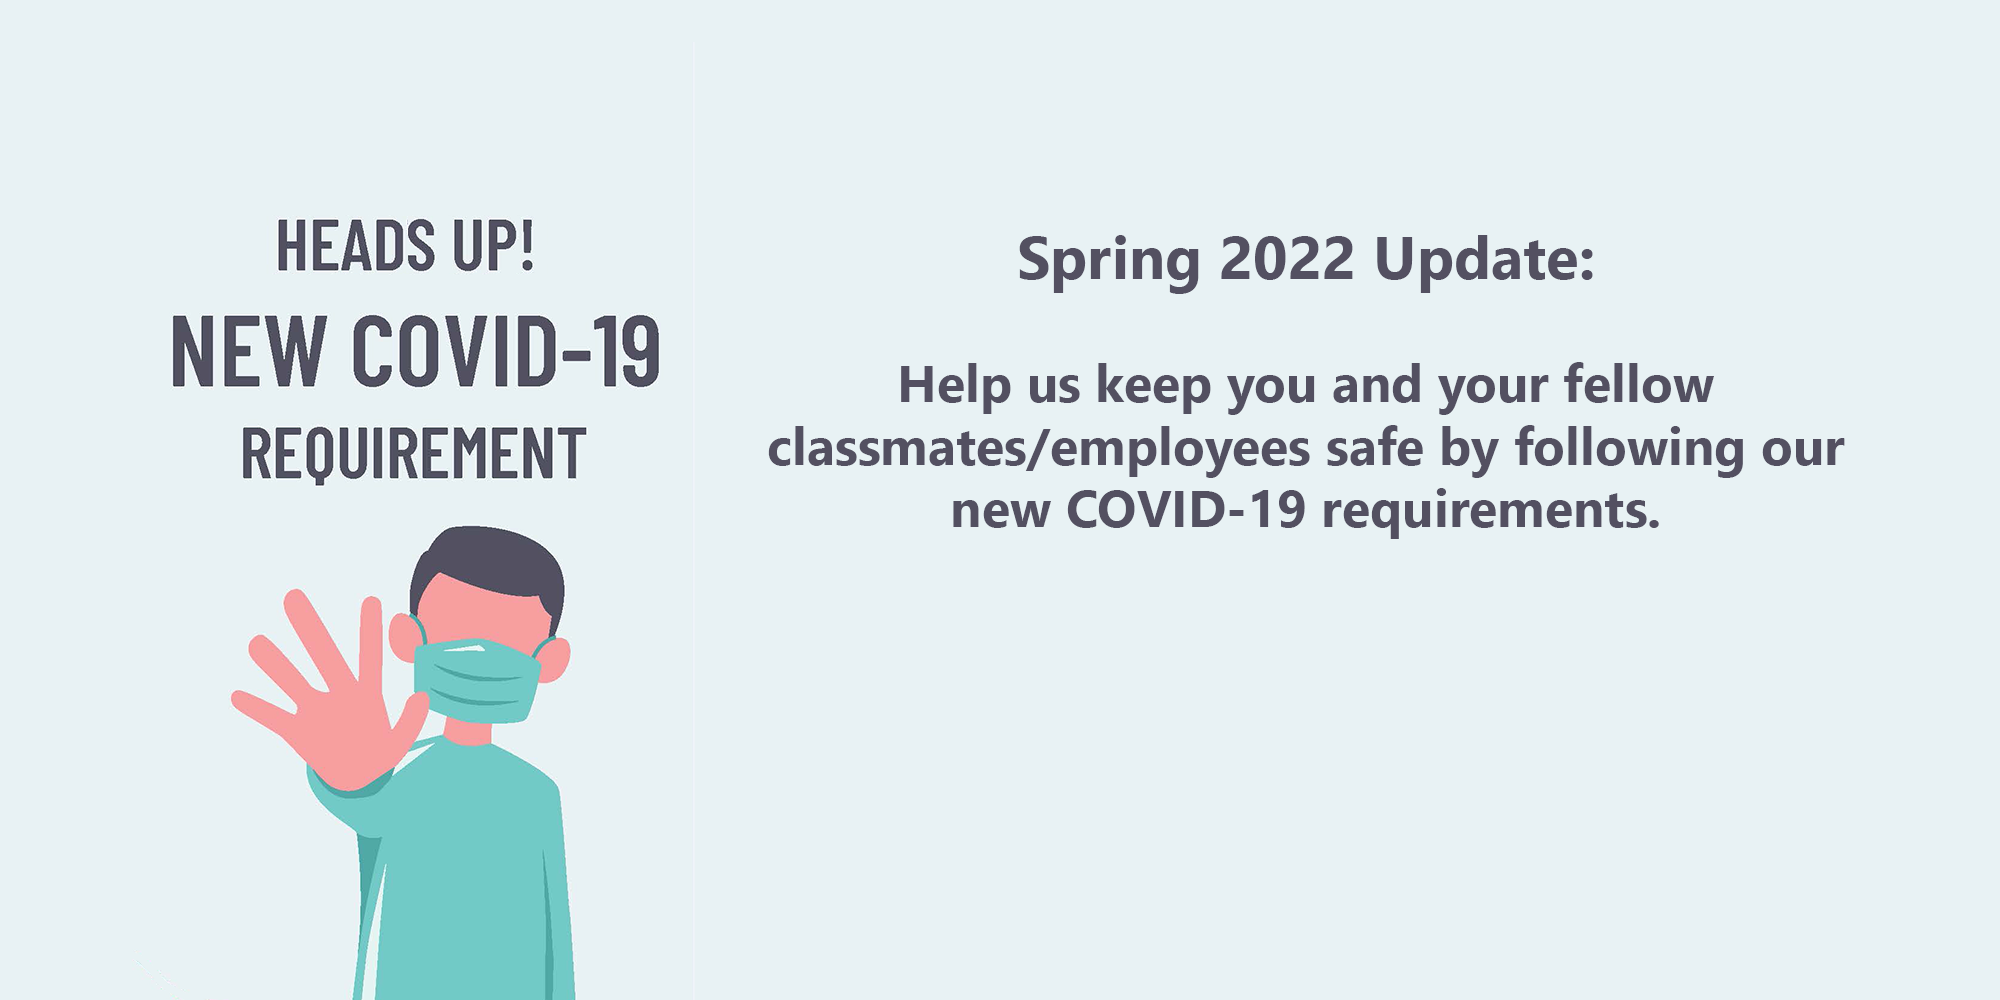 Head's Up! New COVID-19 Requirement. Spring 2022 Update: Help us keep you and your fellow classmates/employees safe by following our new COVID-19 requirements.